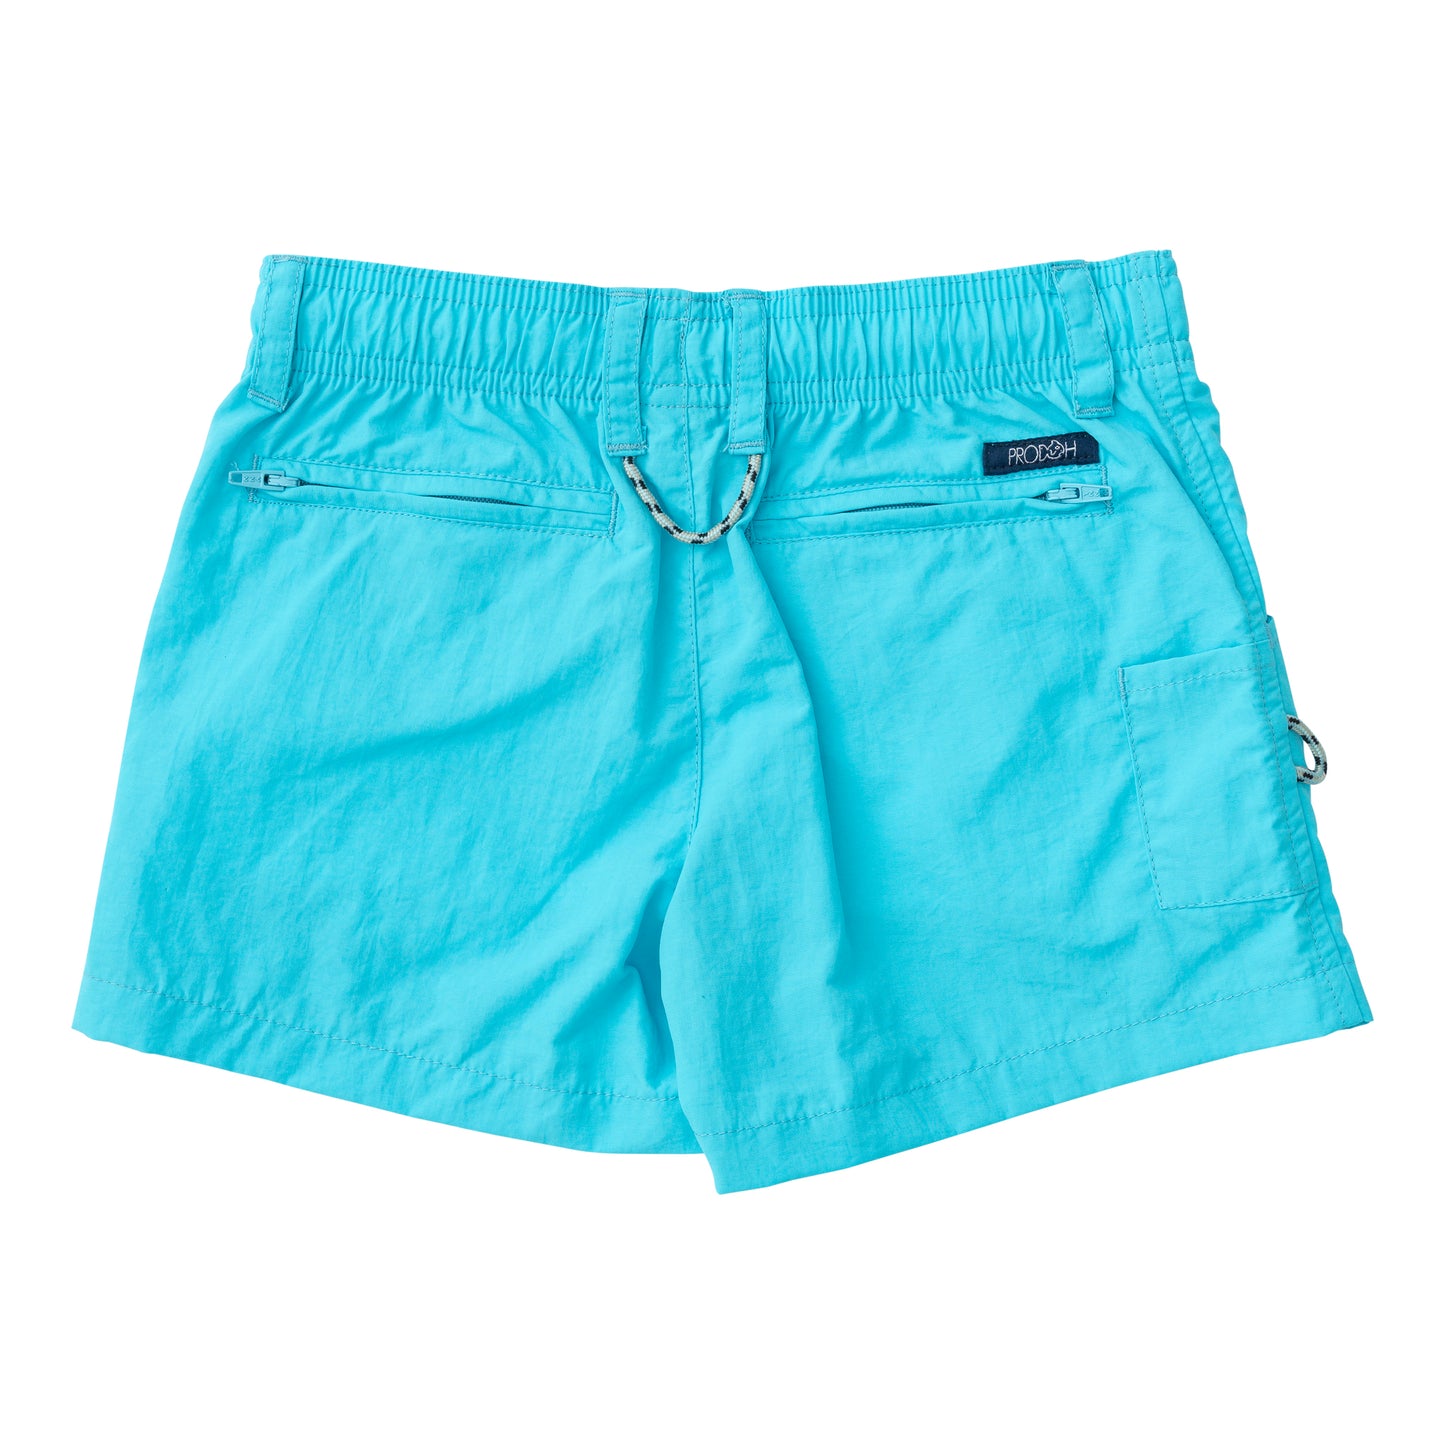 Outrigger Performance Short